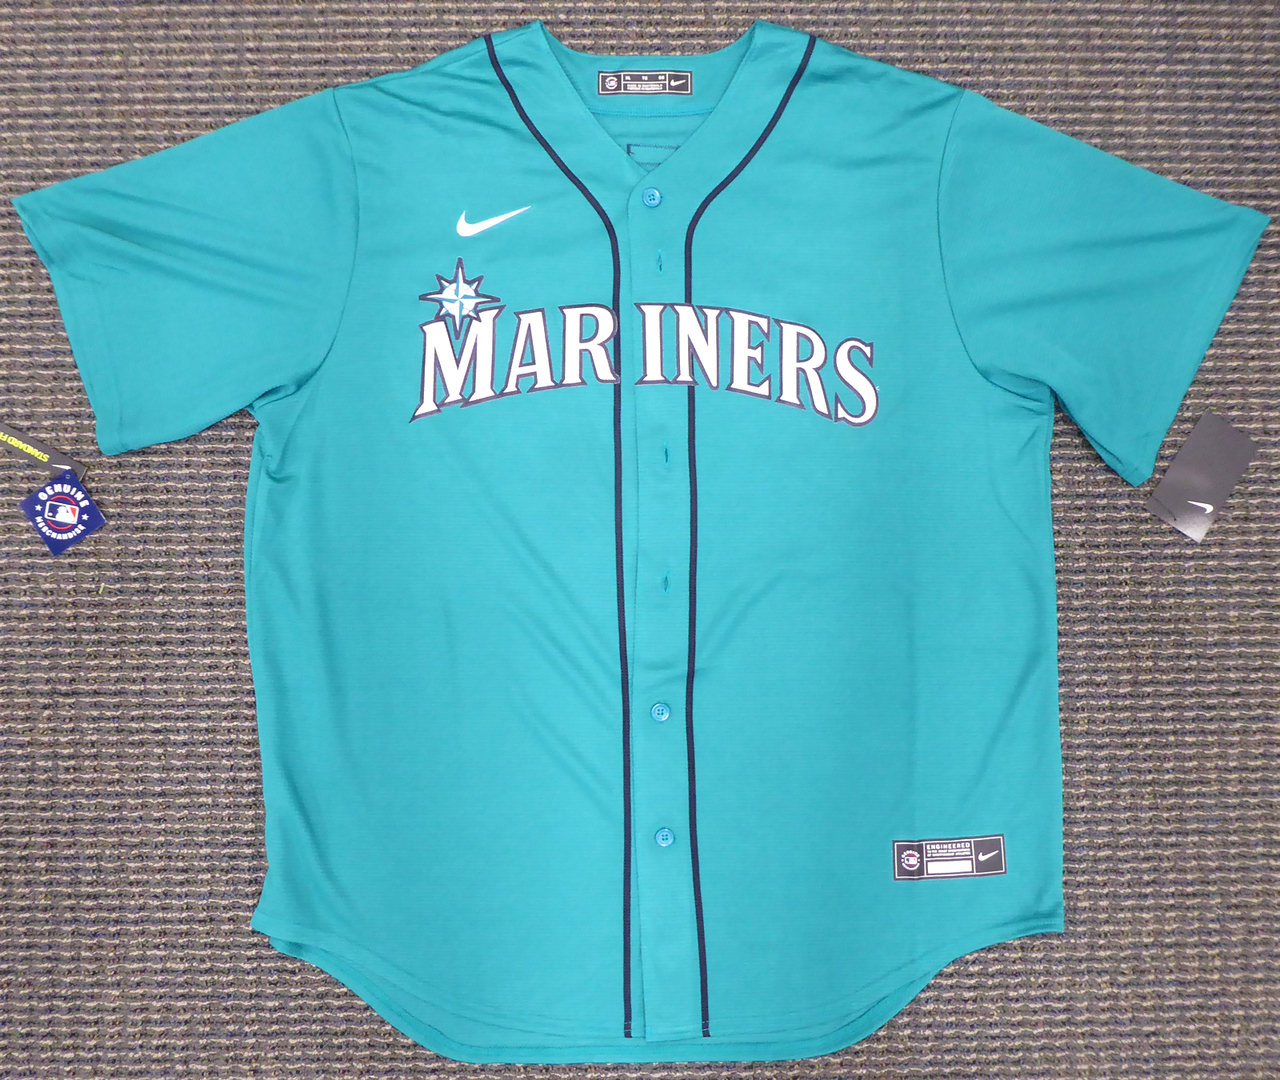 Mariners Team Store on X: Introducing NEW 2020 Nike jerseys available now  at all Mariners Team Stores! Check back for more Nike styles in the coming  weeks. Plus, receive a FREE wooden